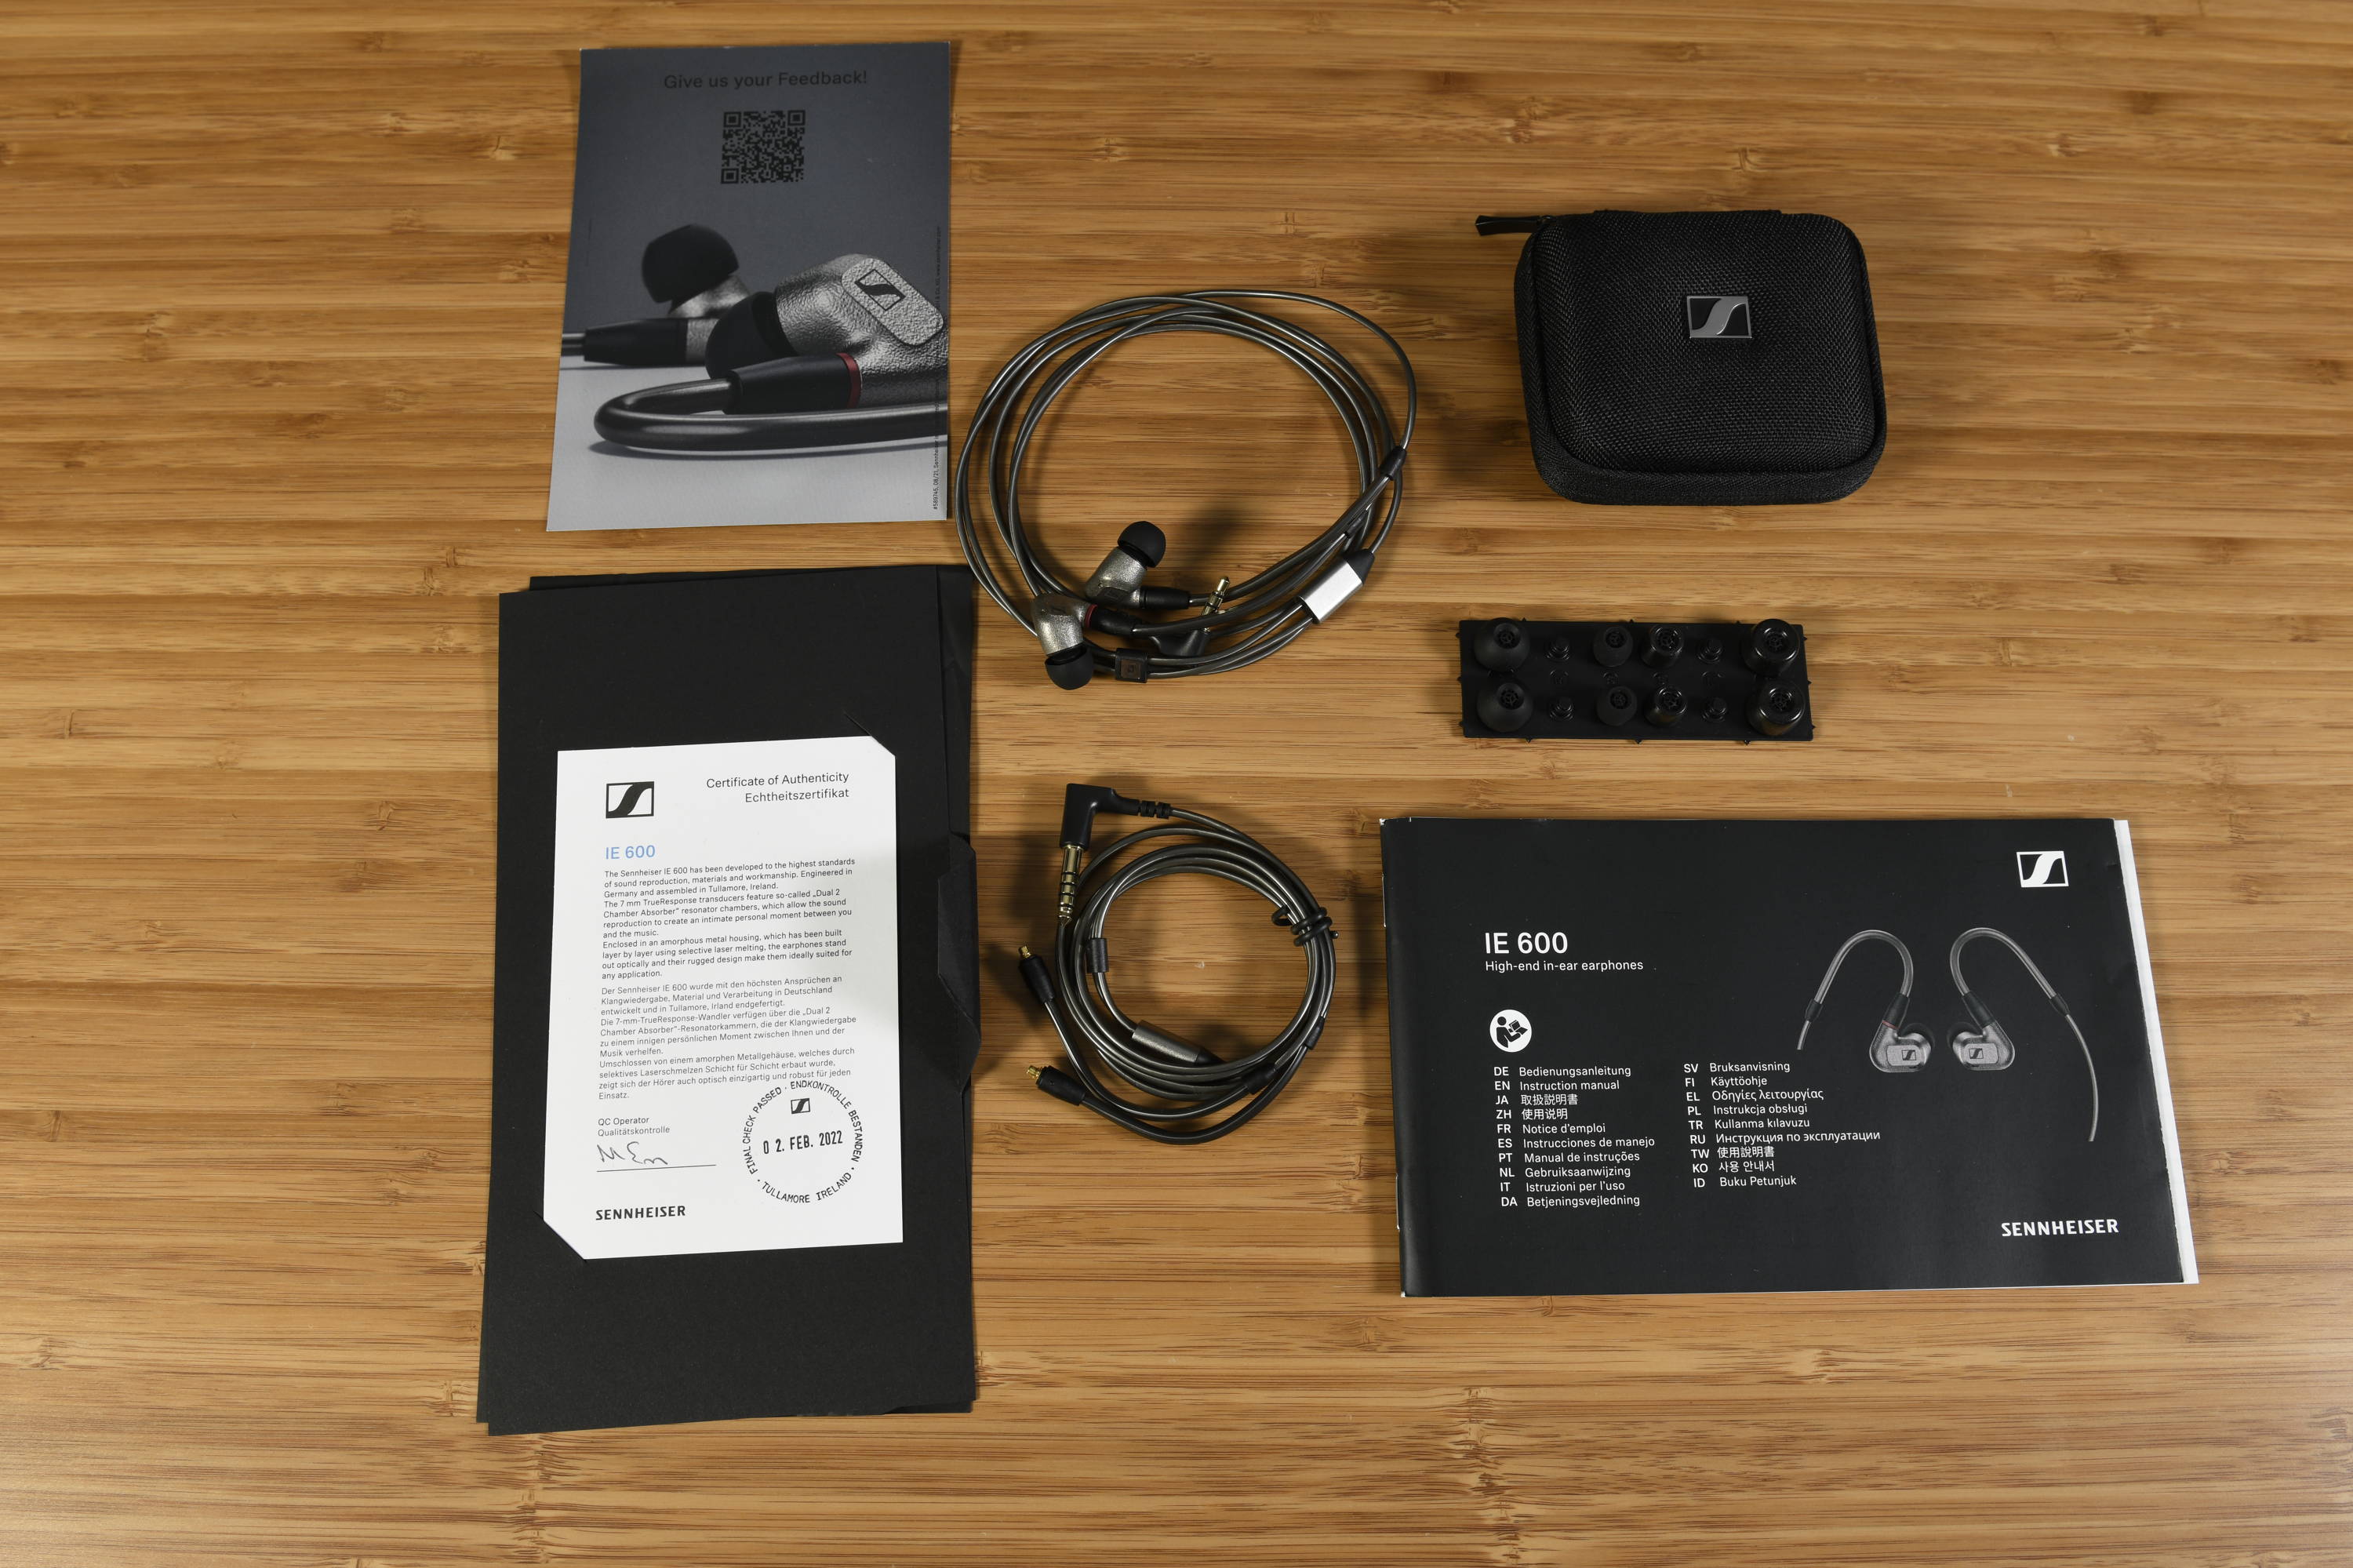 Sennheiser IE 600 and box contents spread out on table 